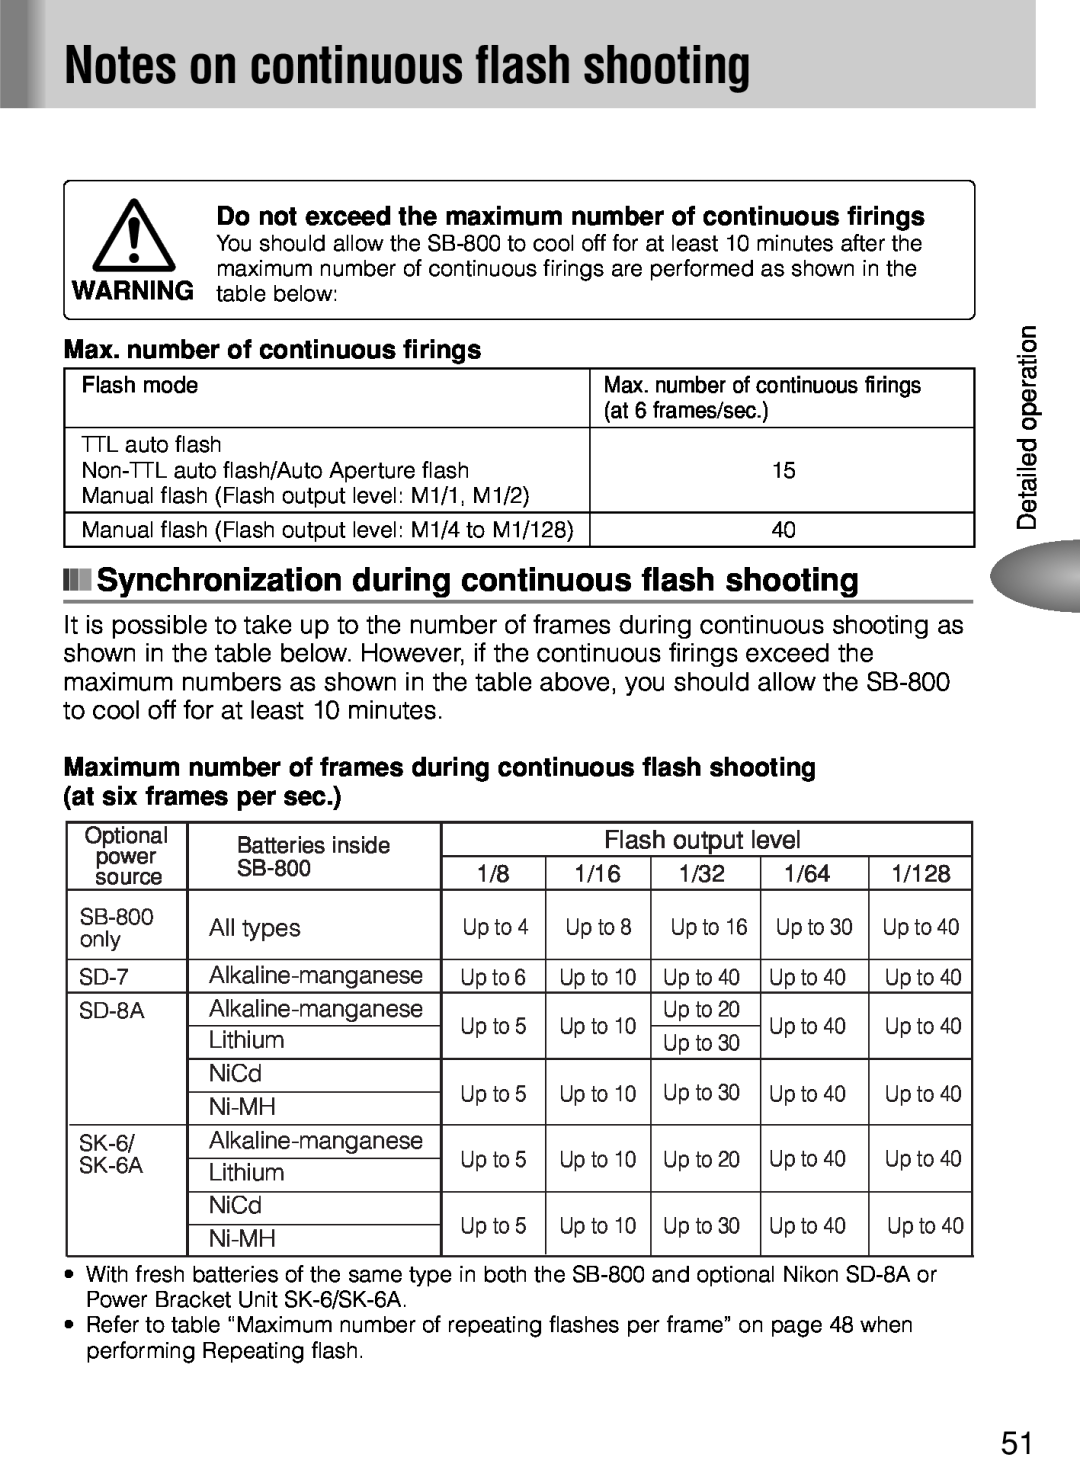 Nikon SB-800 instruction manual Notes on continuous flash shooting, Synchronization during continuous flash shooting 